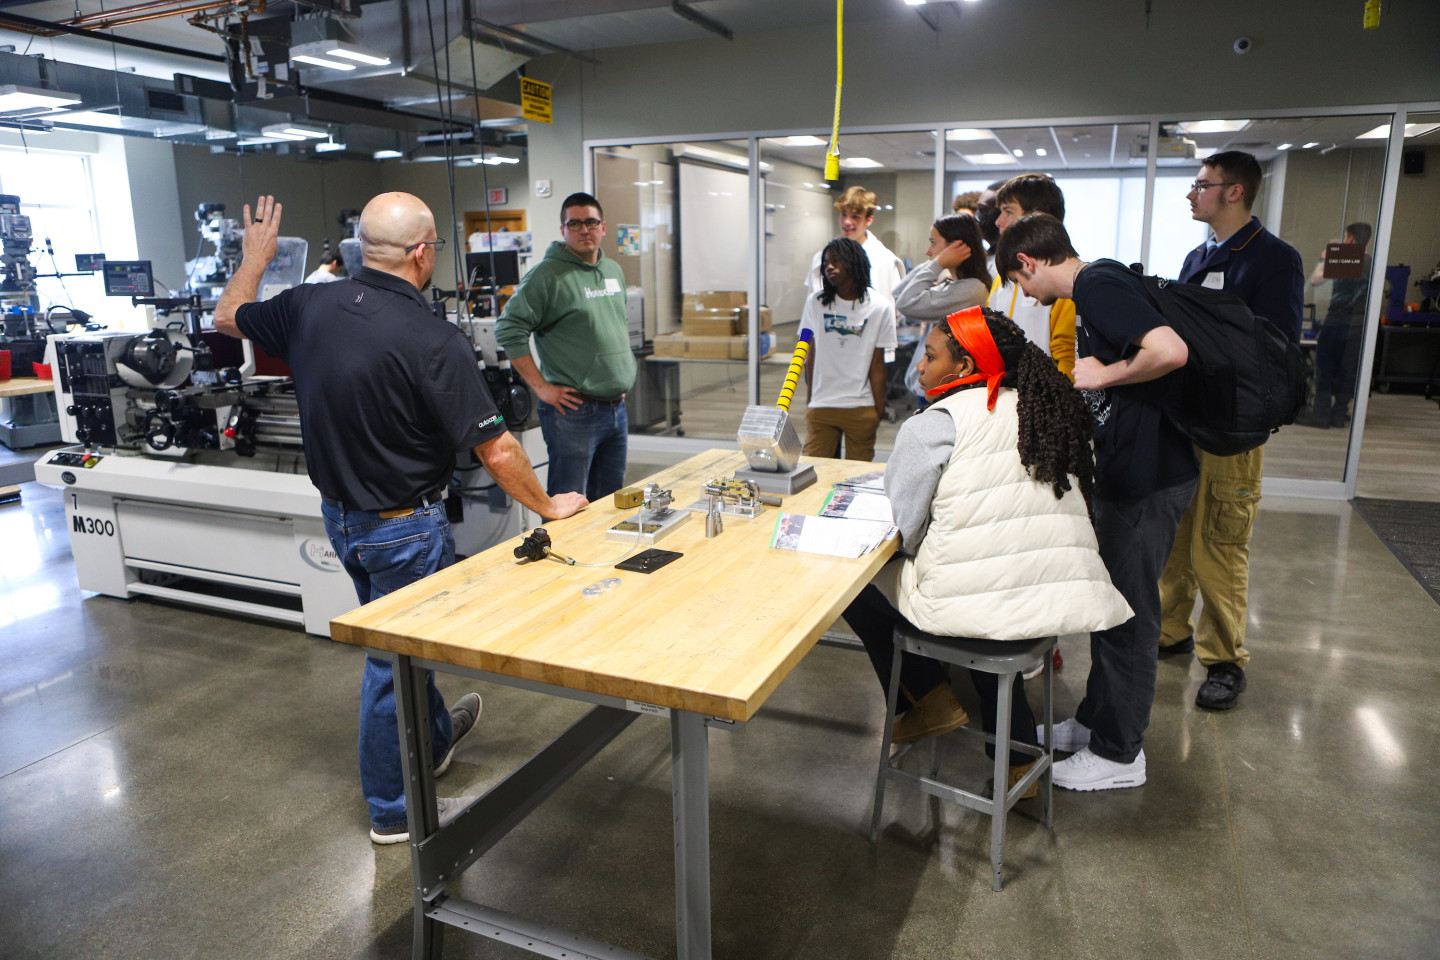 An instructor talks to students at a wooden table in the AMP Lab.